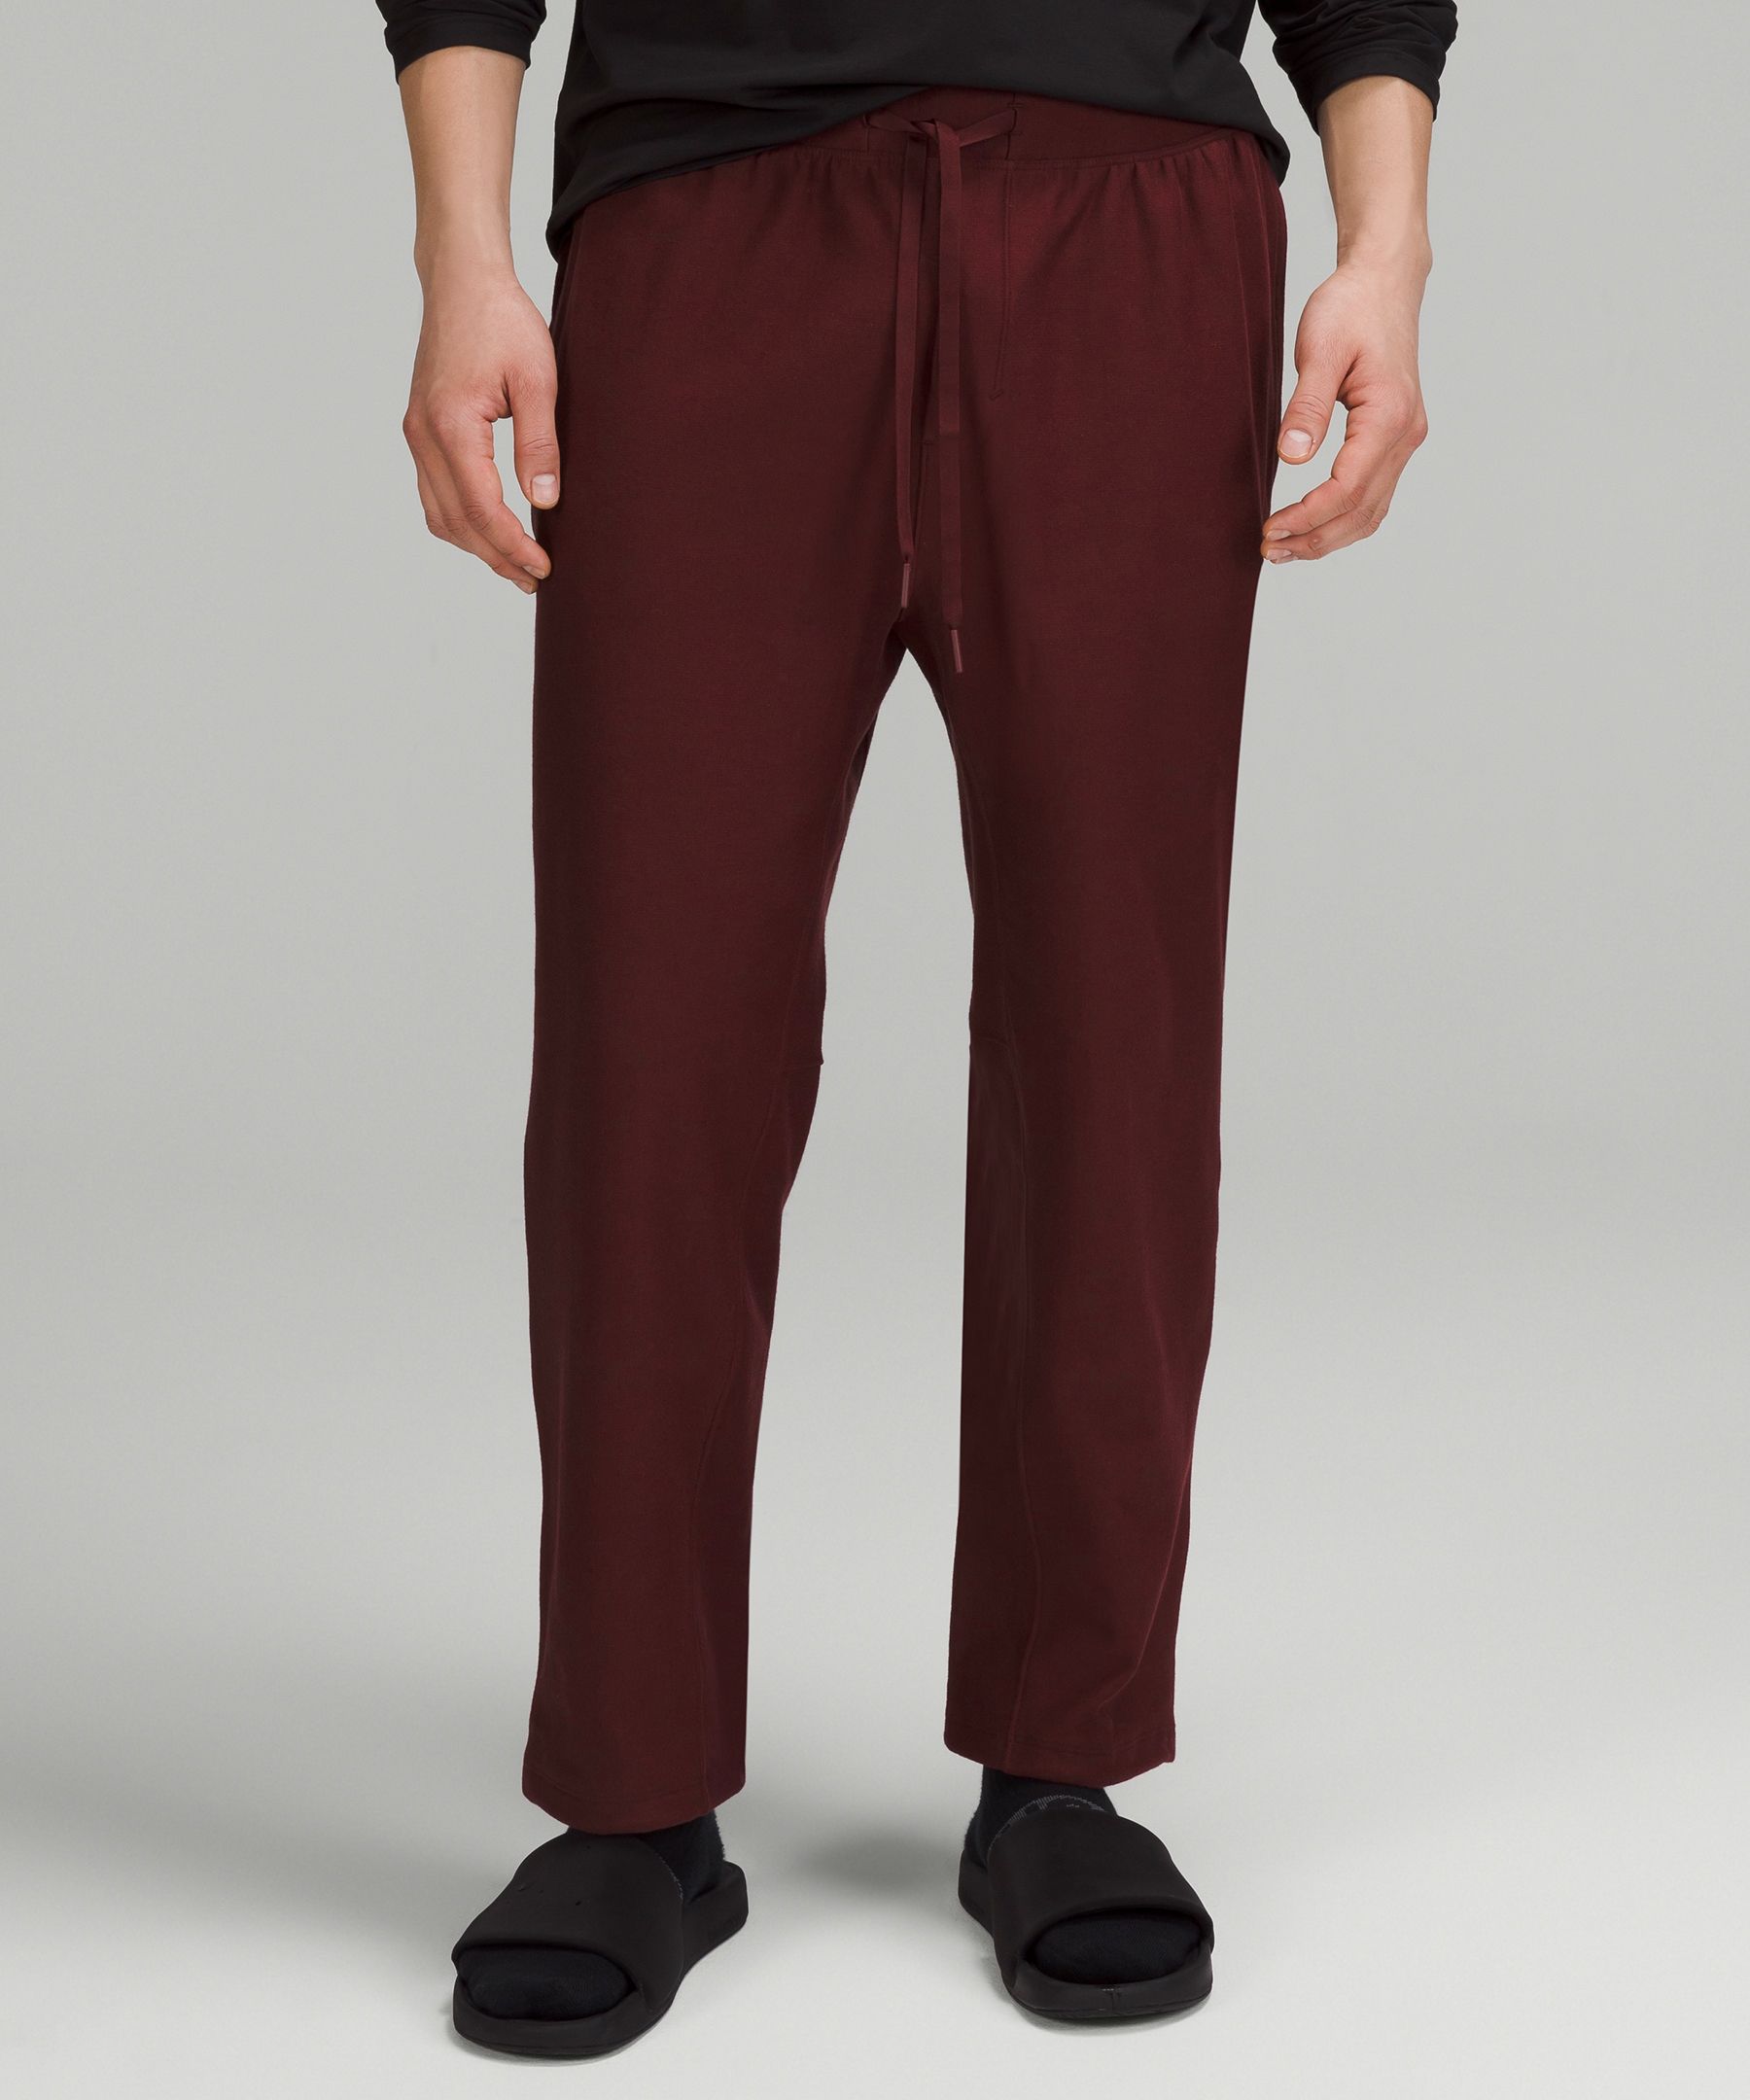 Lunar New Year Relaxed-Fit French Terry Jogger